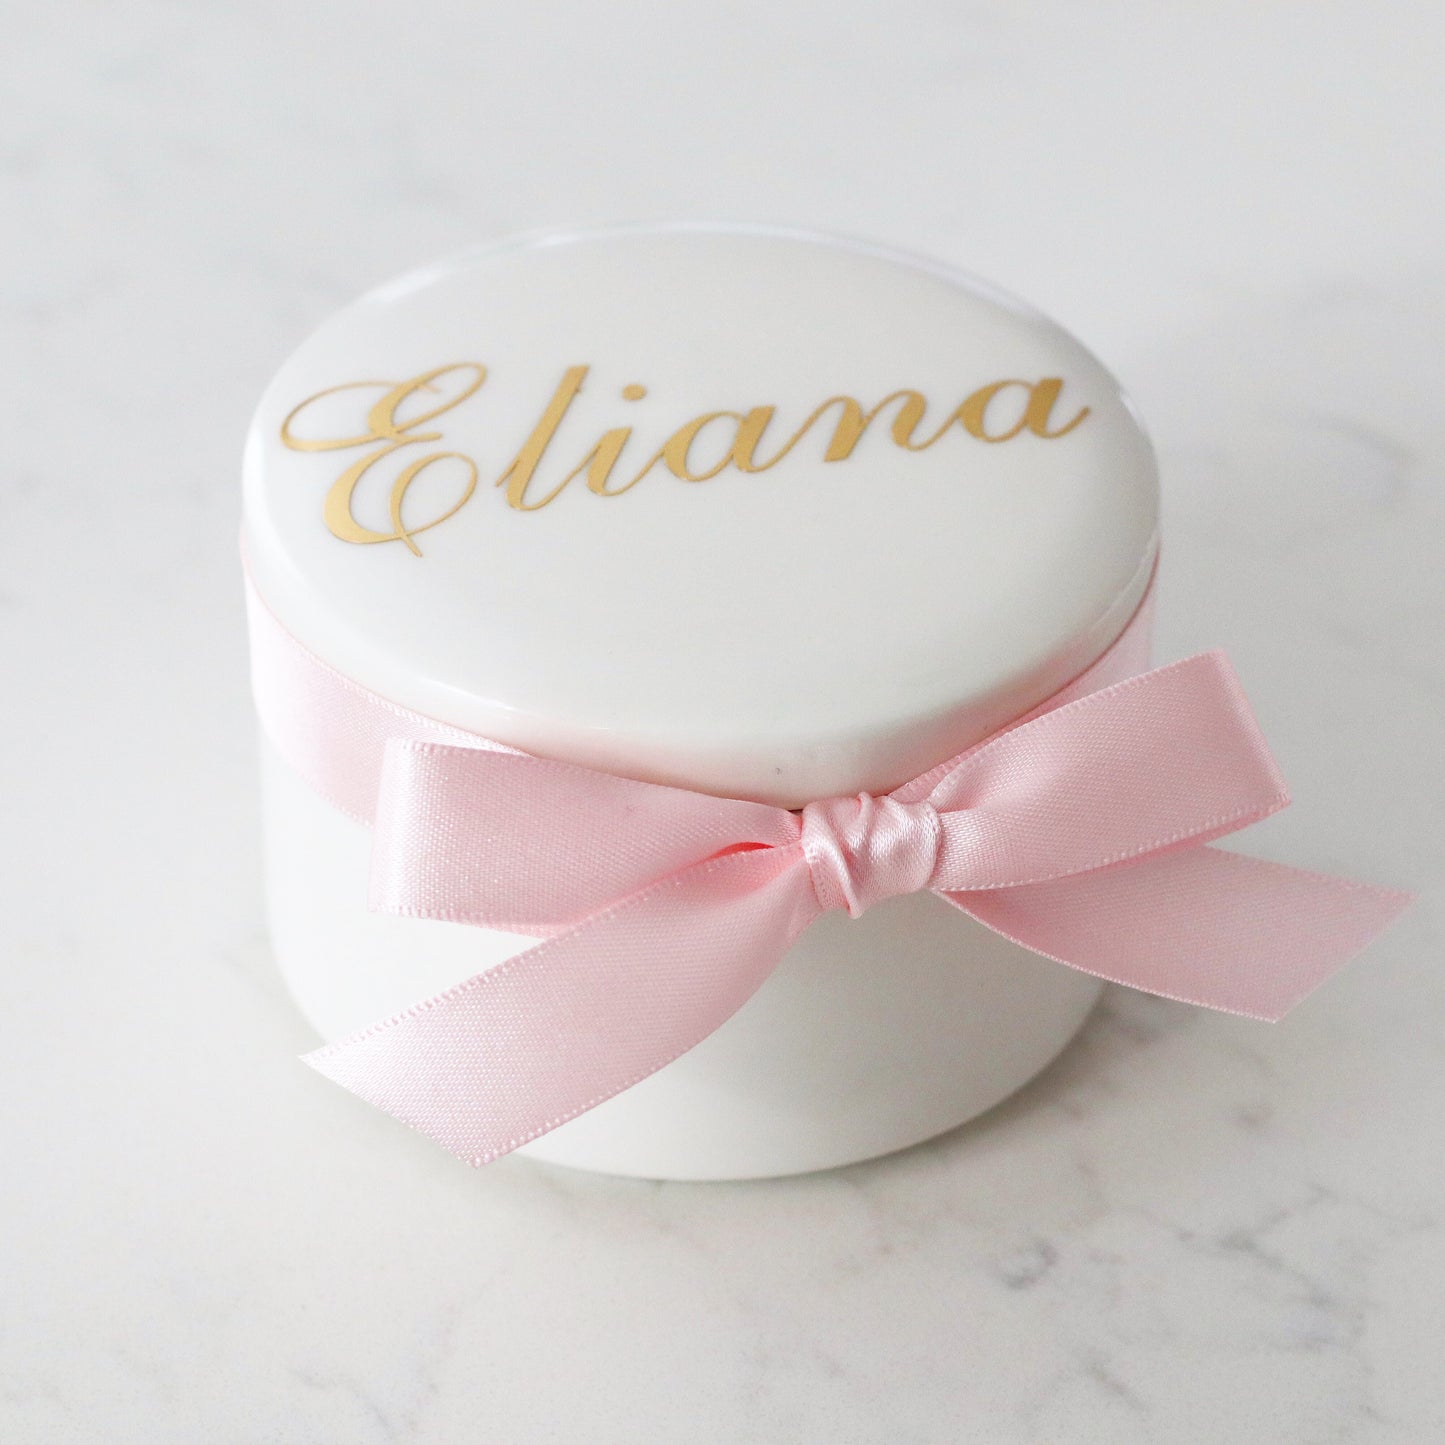 Ceramic white trinket box to keep all your special little things, personalised with text on the lid.